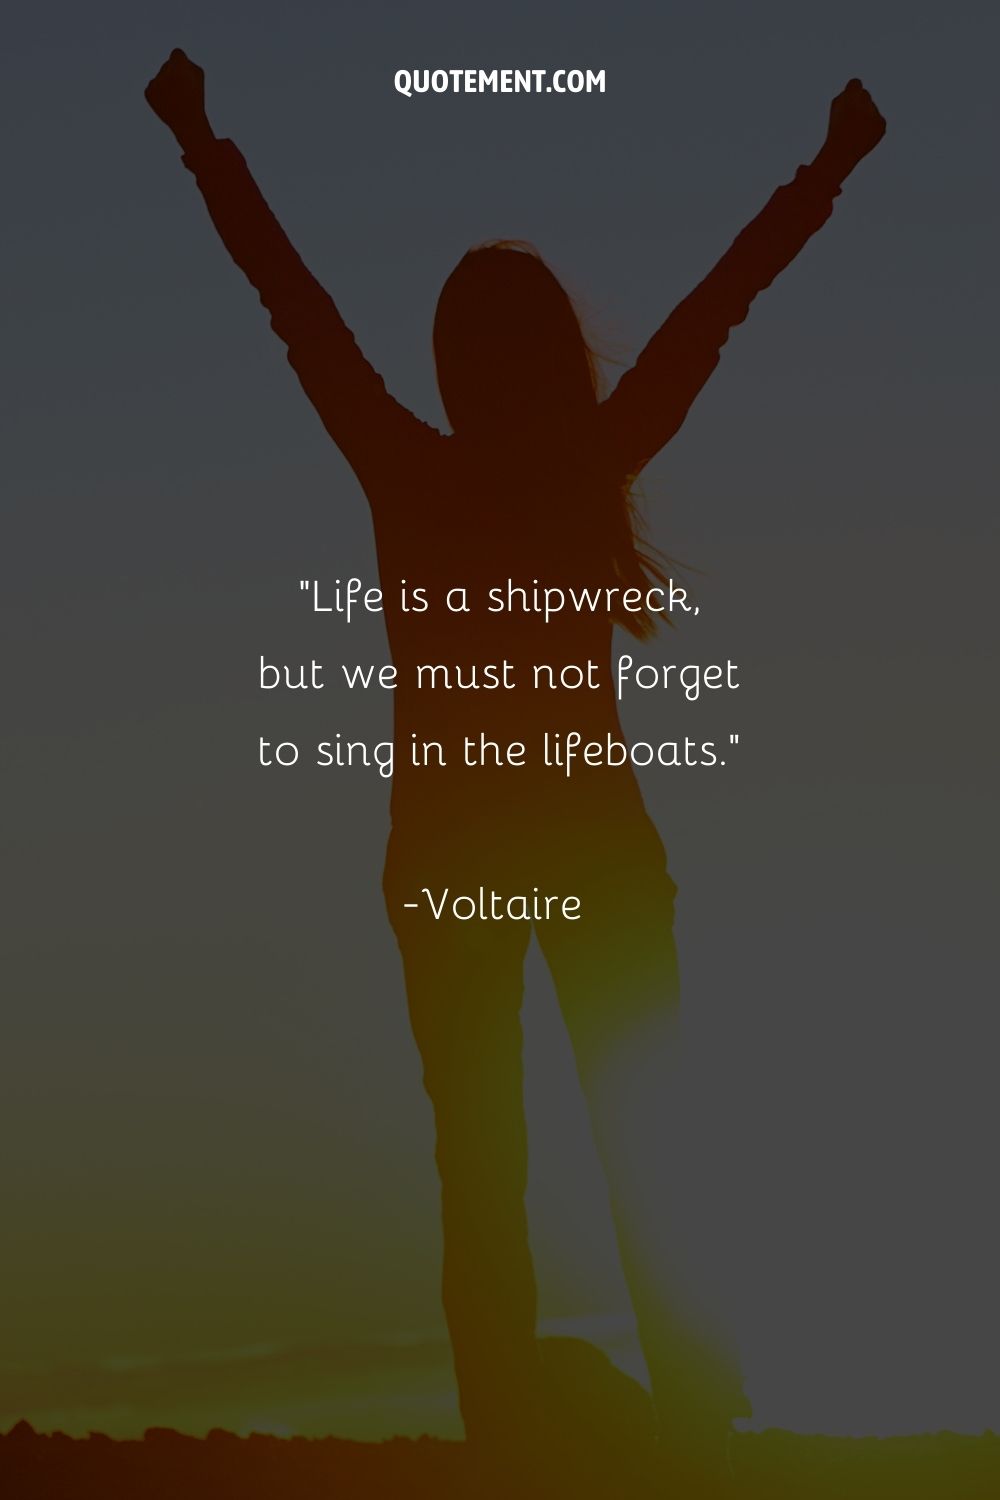 Life is a shipwreck, but we must not forget to sing in the lifeboats